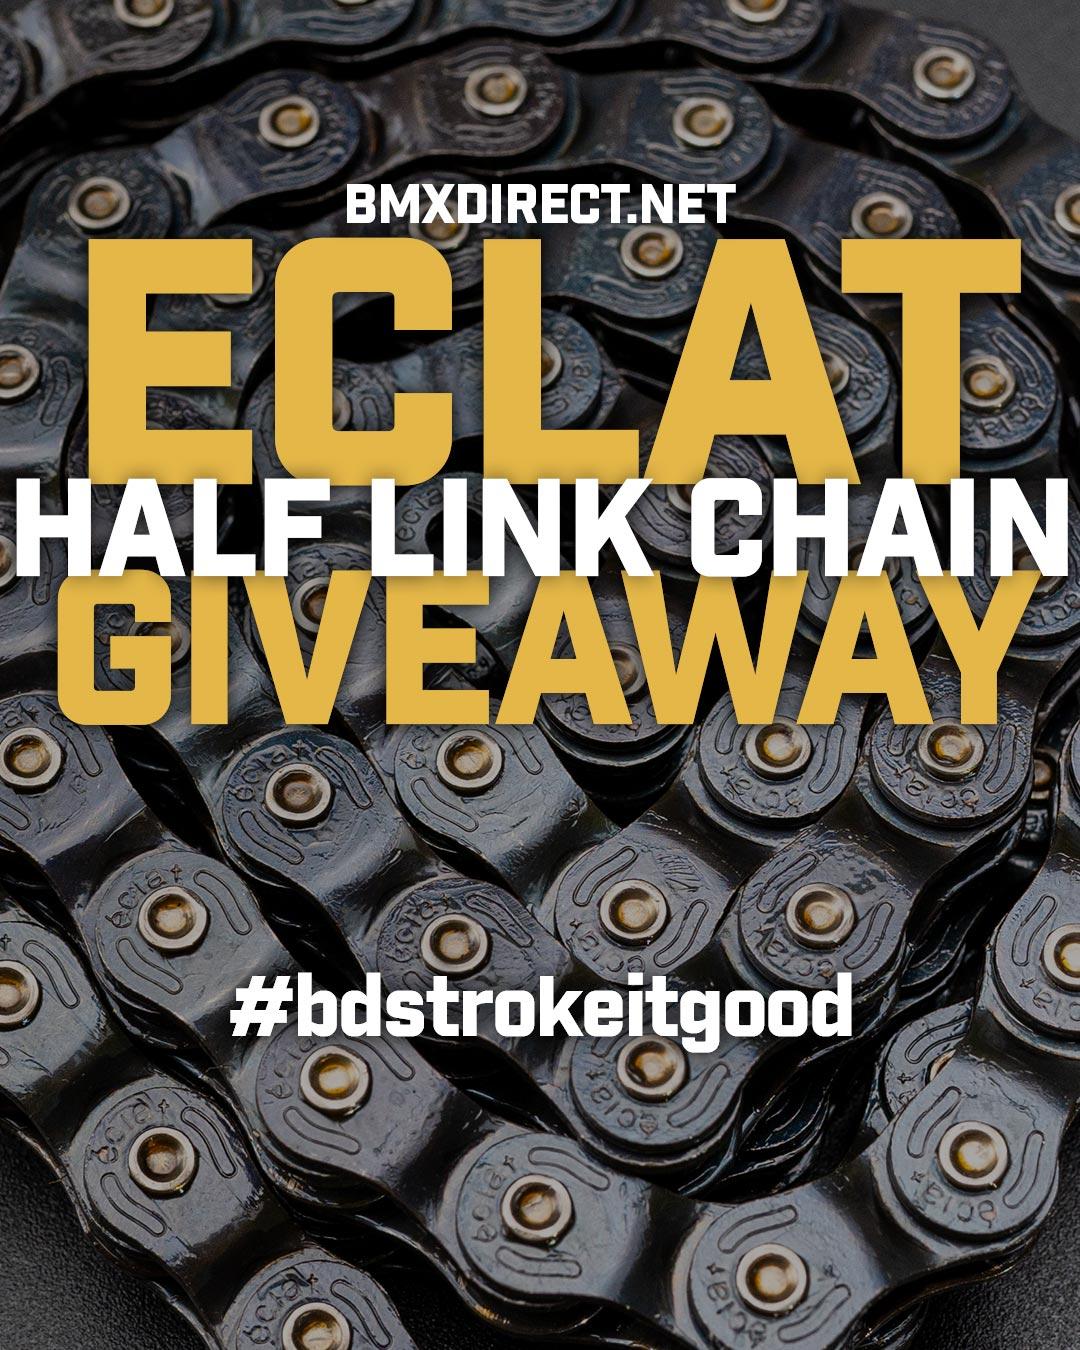 4Stroke Chain giveaway! #bdstrokeitgood